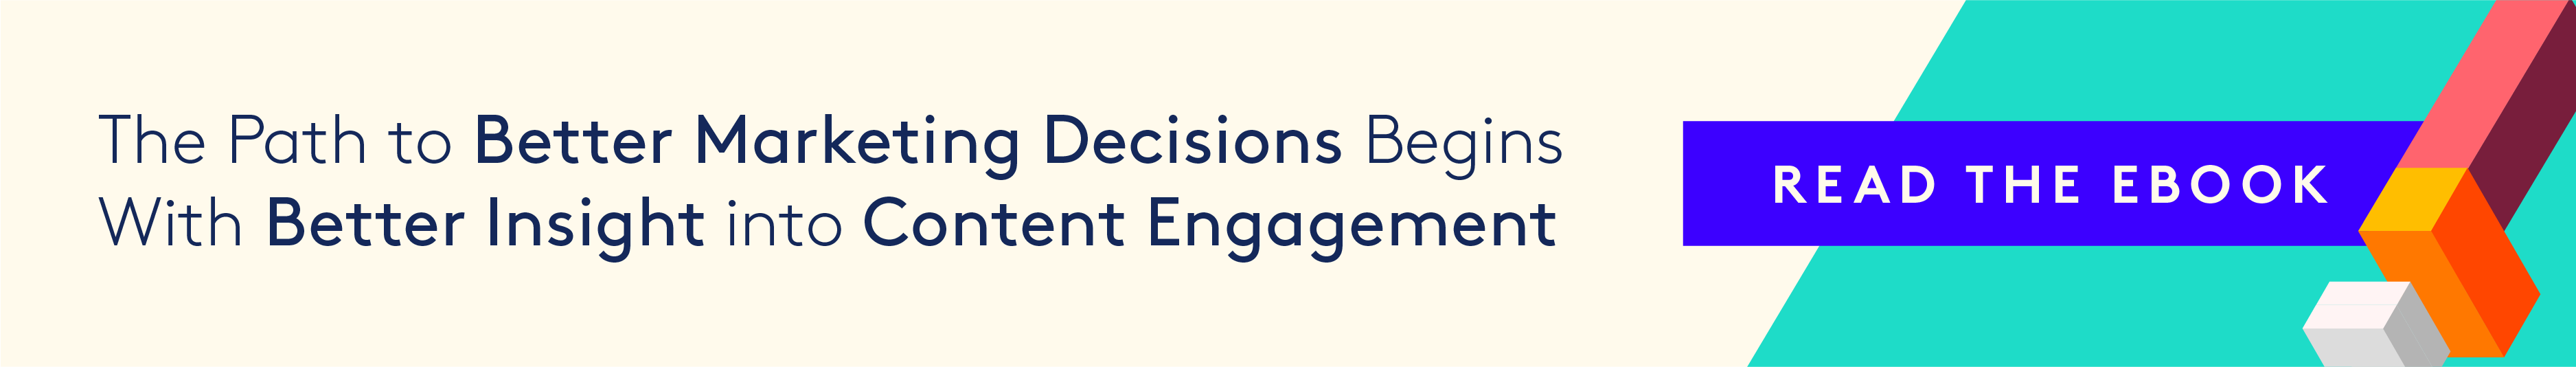 The Path to Better Marketing Decisions Begins with Better Insight into Content Engagement. Button to click